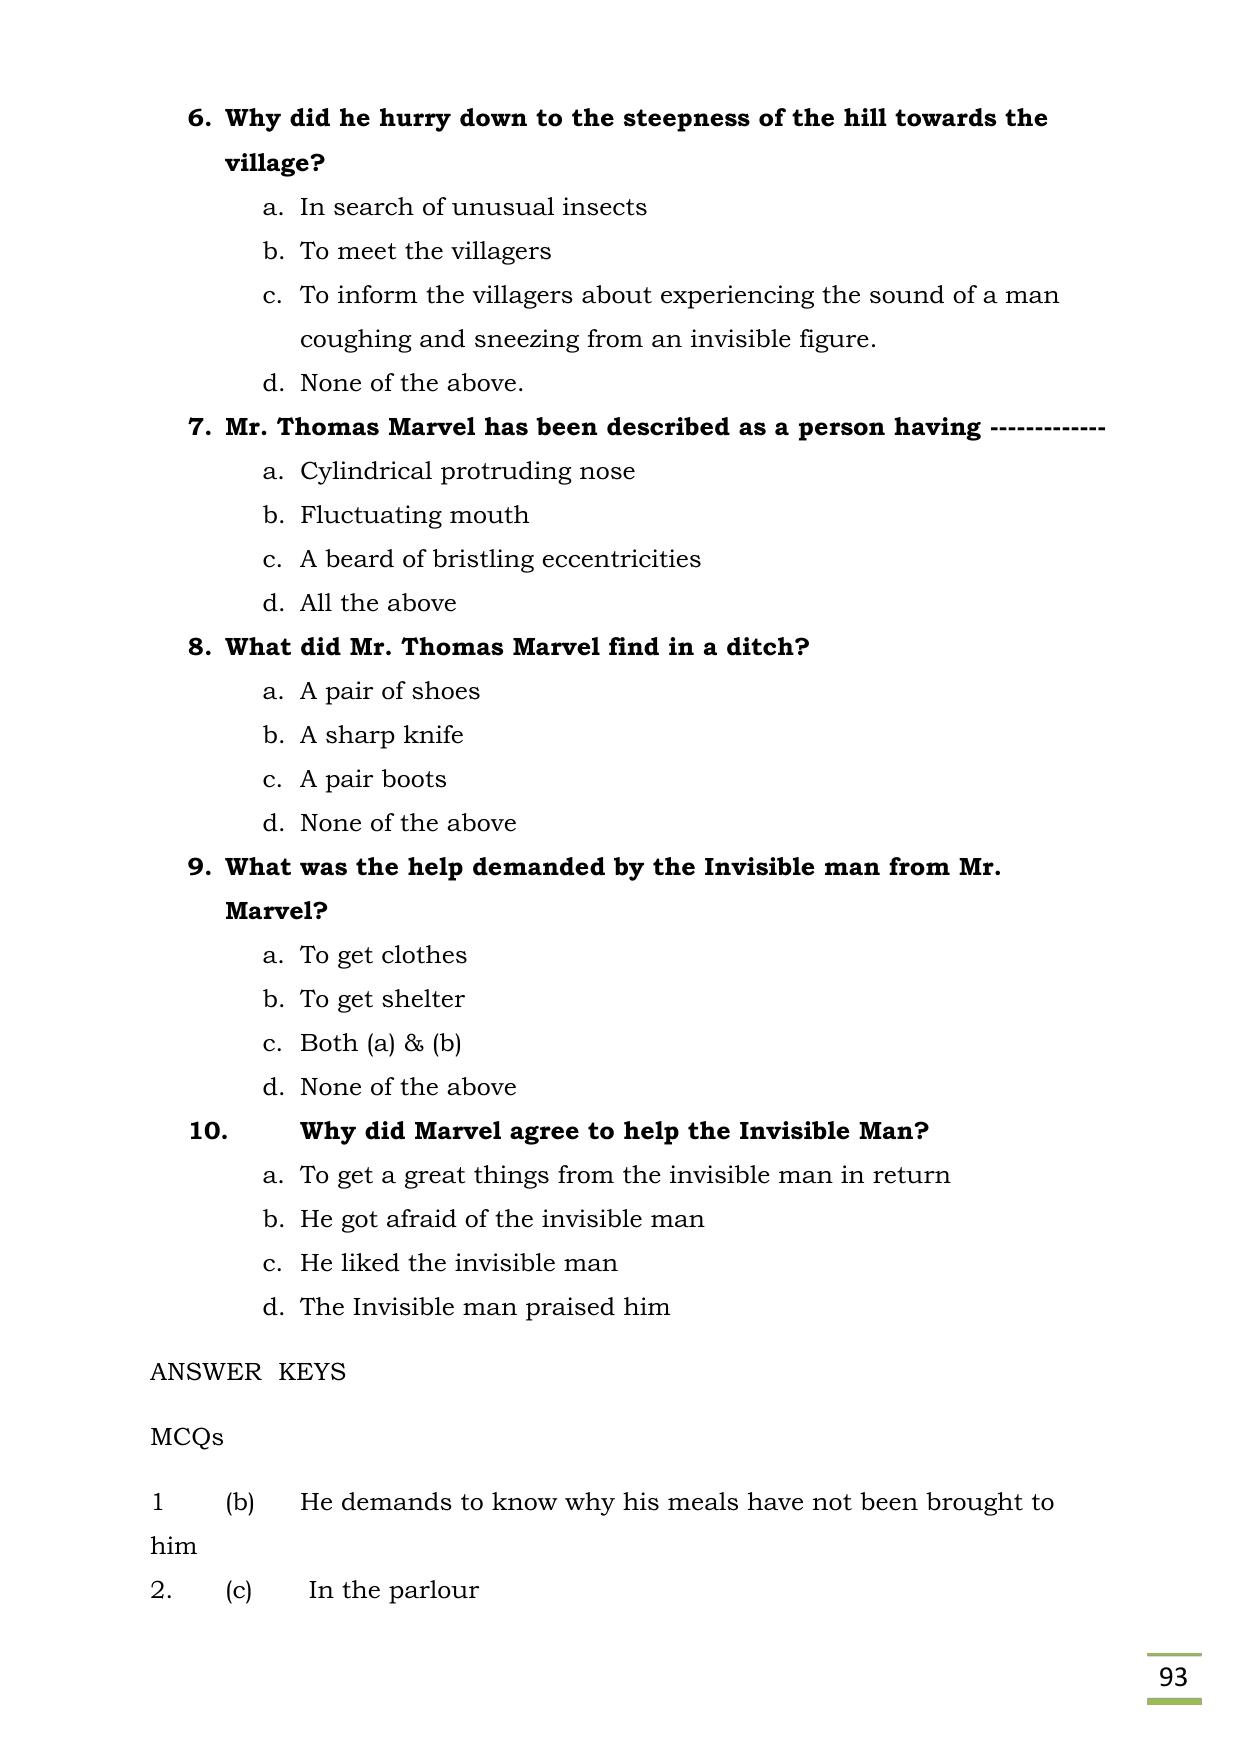 CBSE Worksheets for Class 11 English Invisible Man questions answers - Page 11